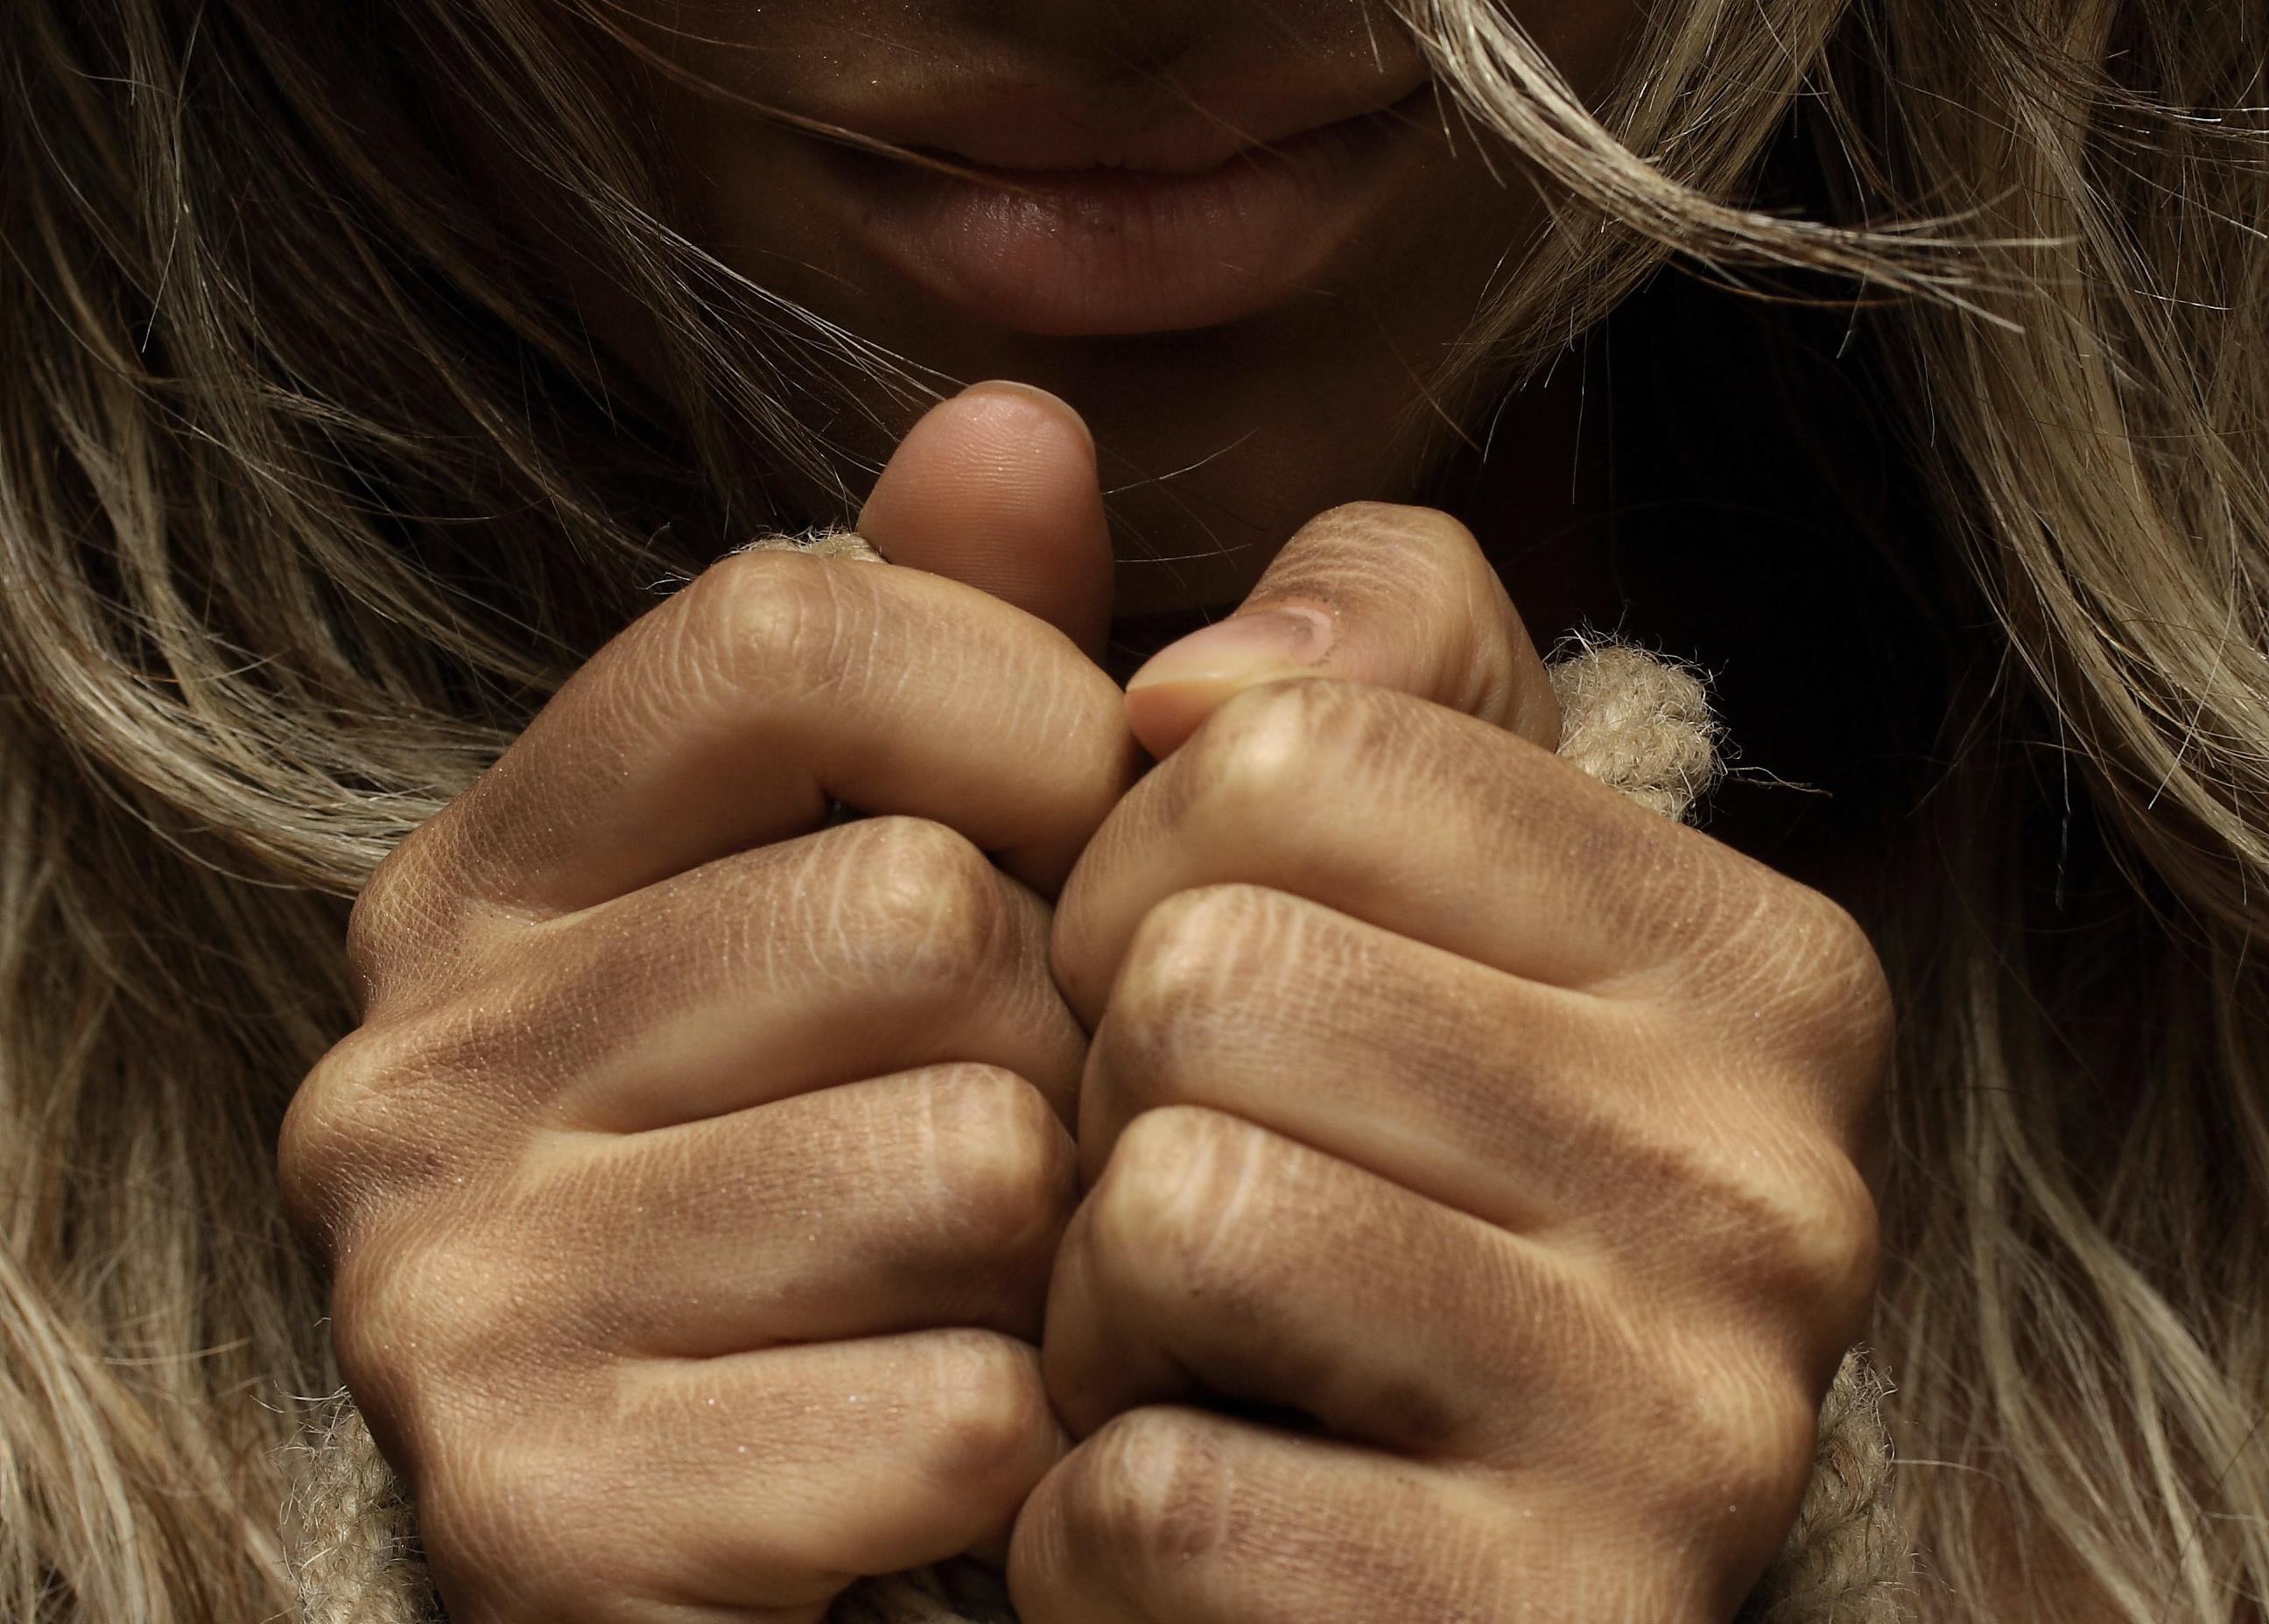 Close-up of woman with bound hands